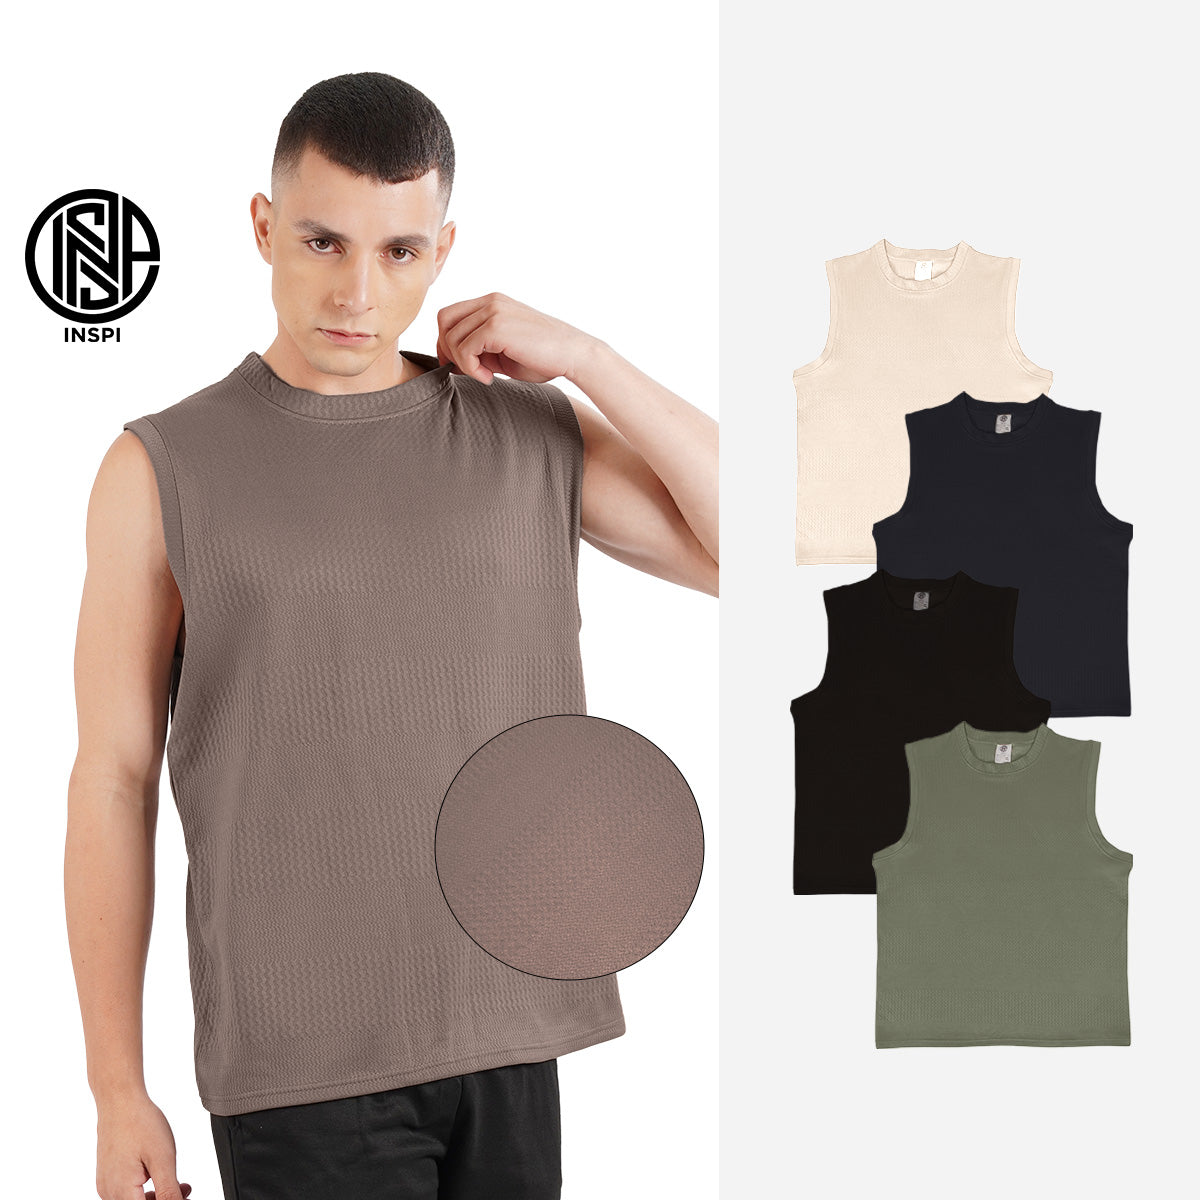 INSPI Textured Muscle Tee Collection For Men Sleeveless Striped Mocha Tank Top Sando For Women Gym Workout Clothes Exercise Outfit